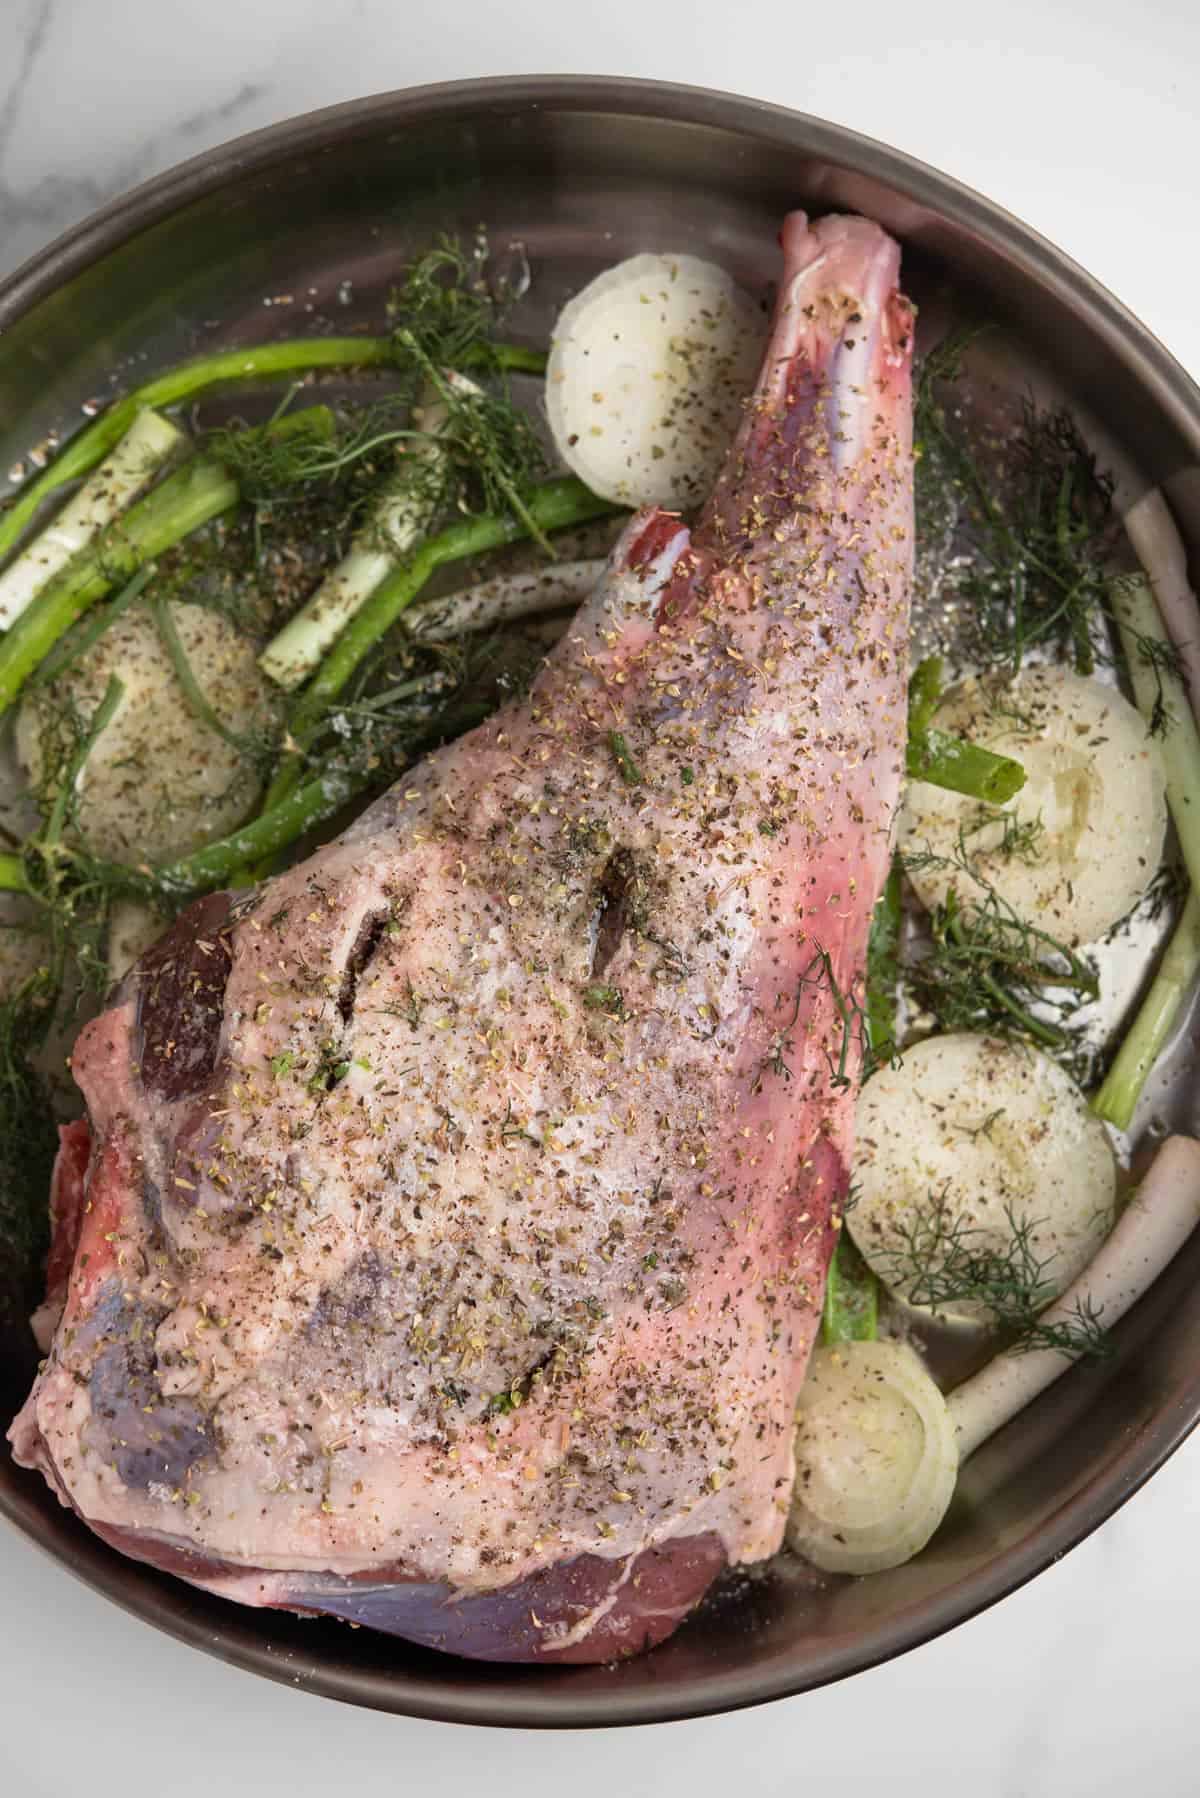 How To Slow Cook Lamb leg In The Oven